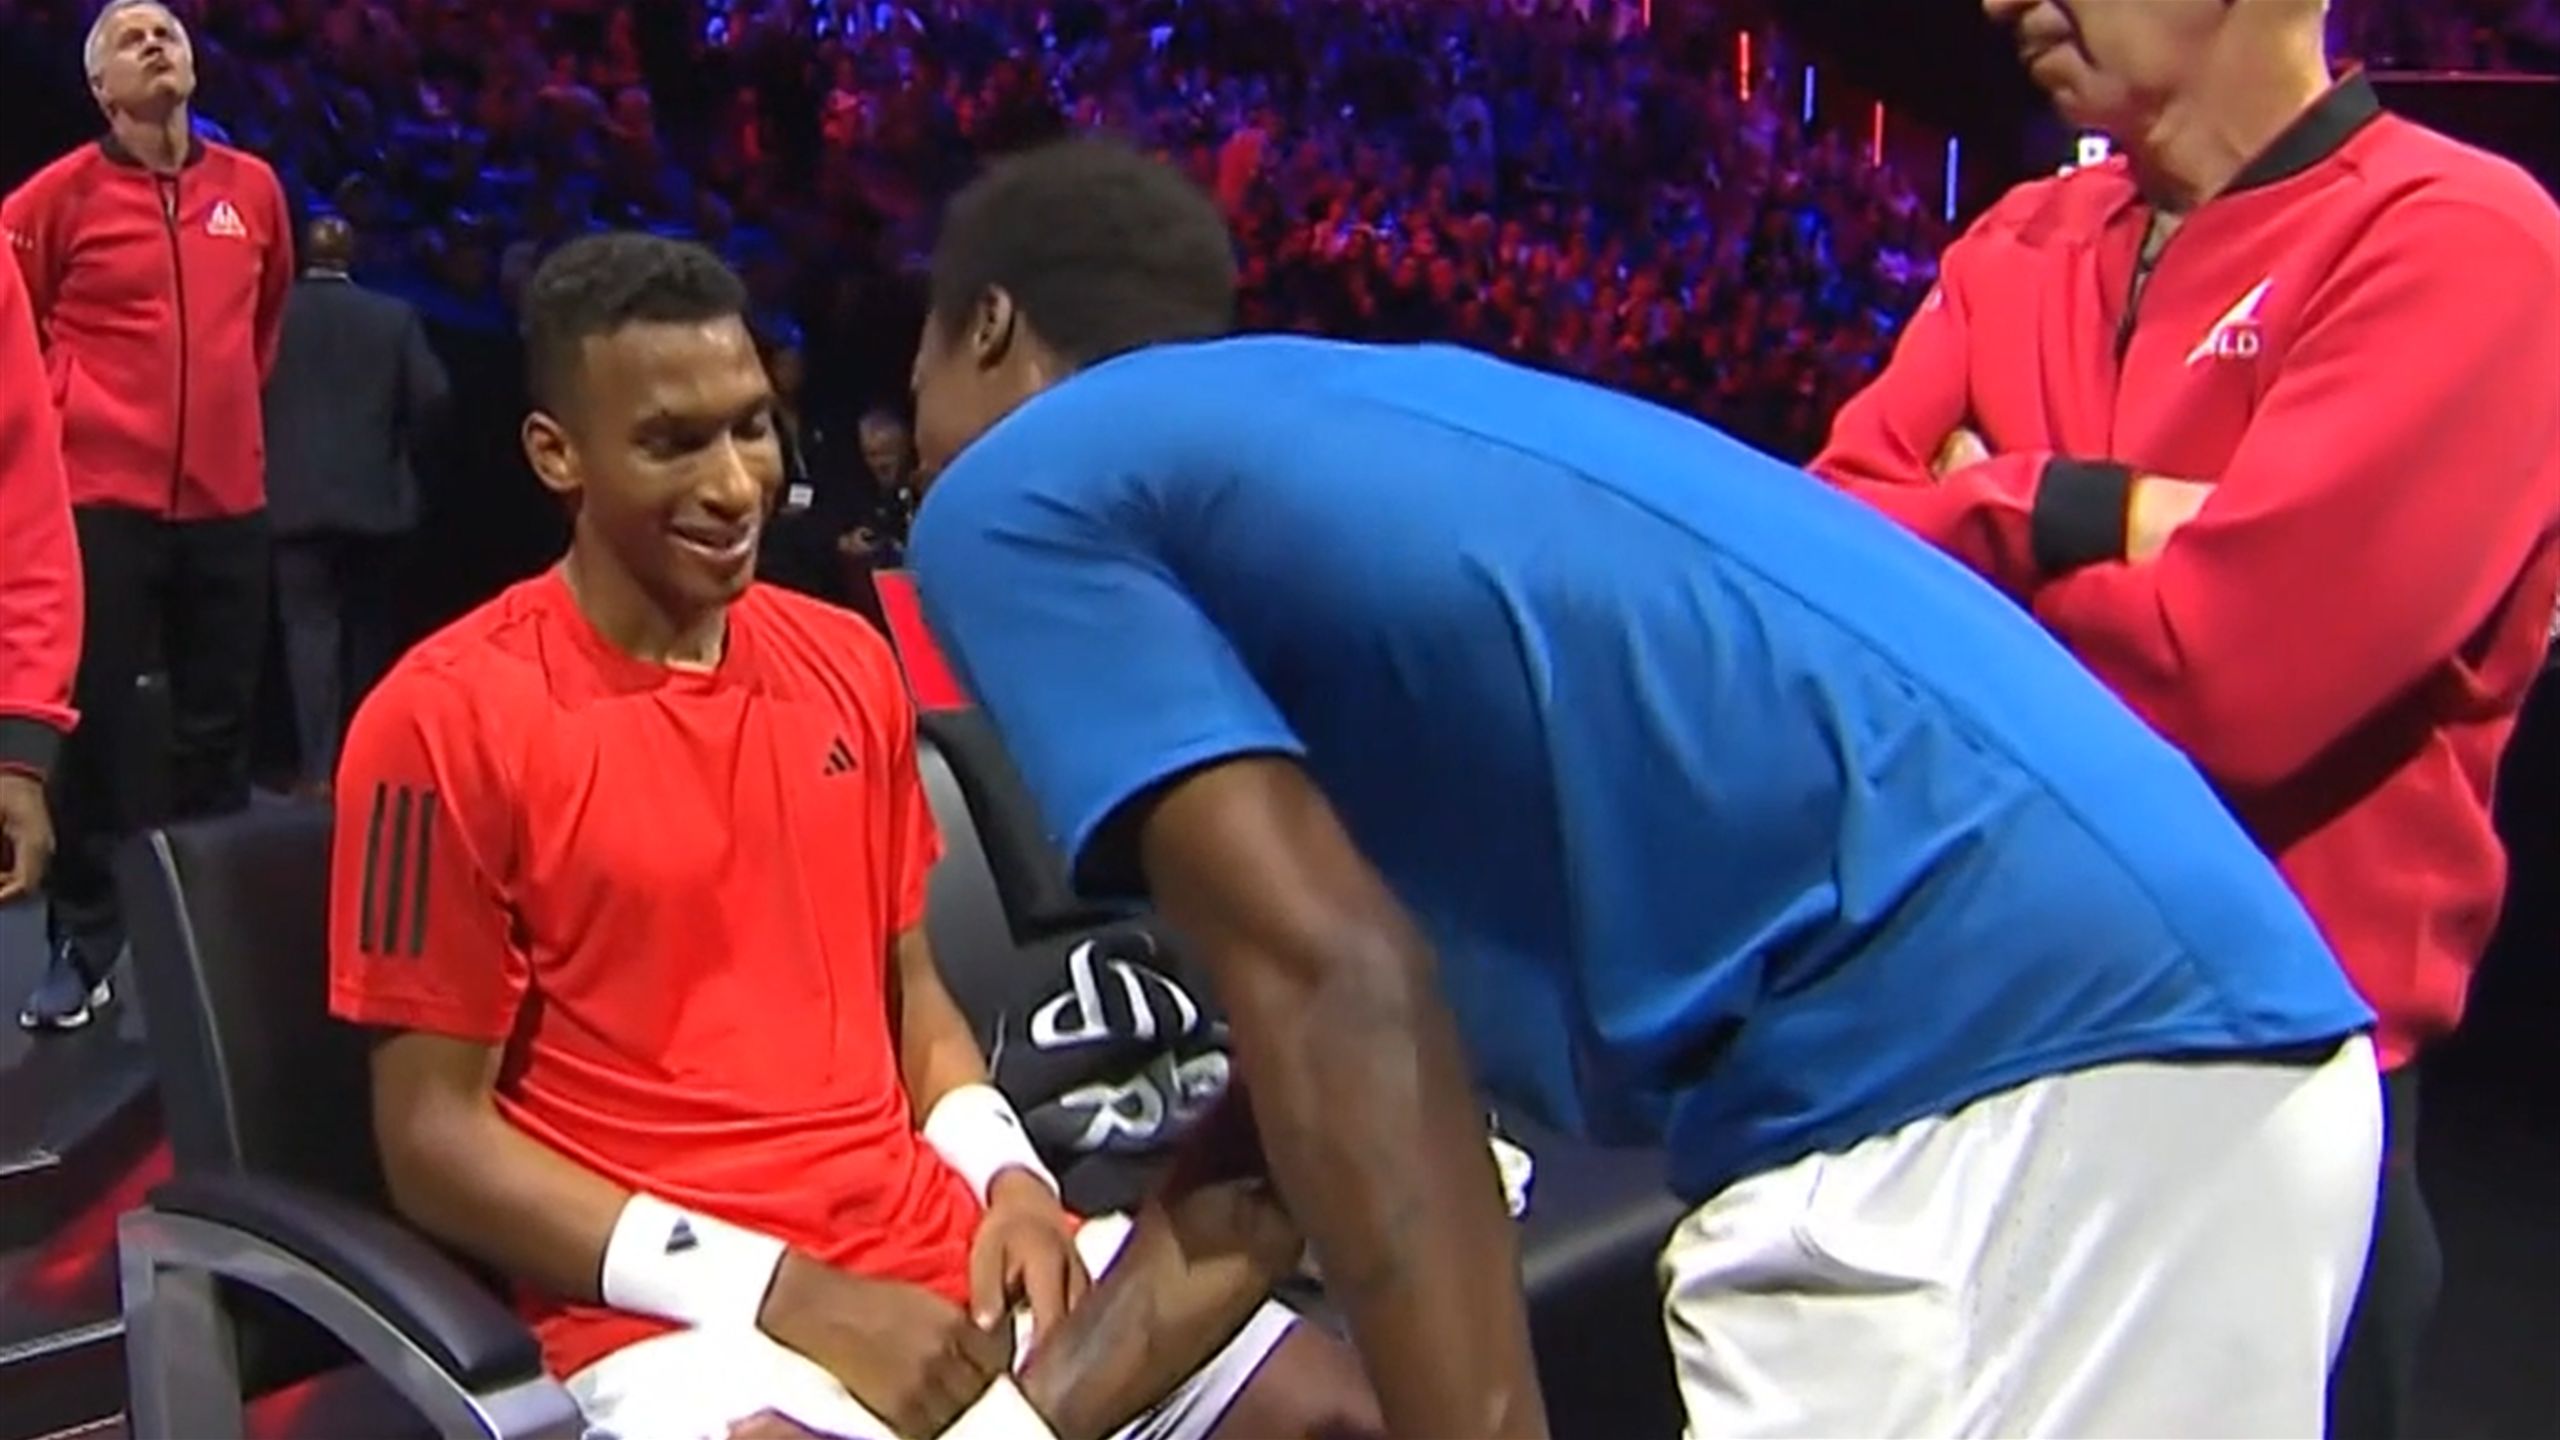 Laver Cup 2023 I can play games too - Felix Auger-Aliassime and Gael Monfils in tense moment